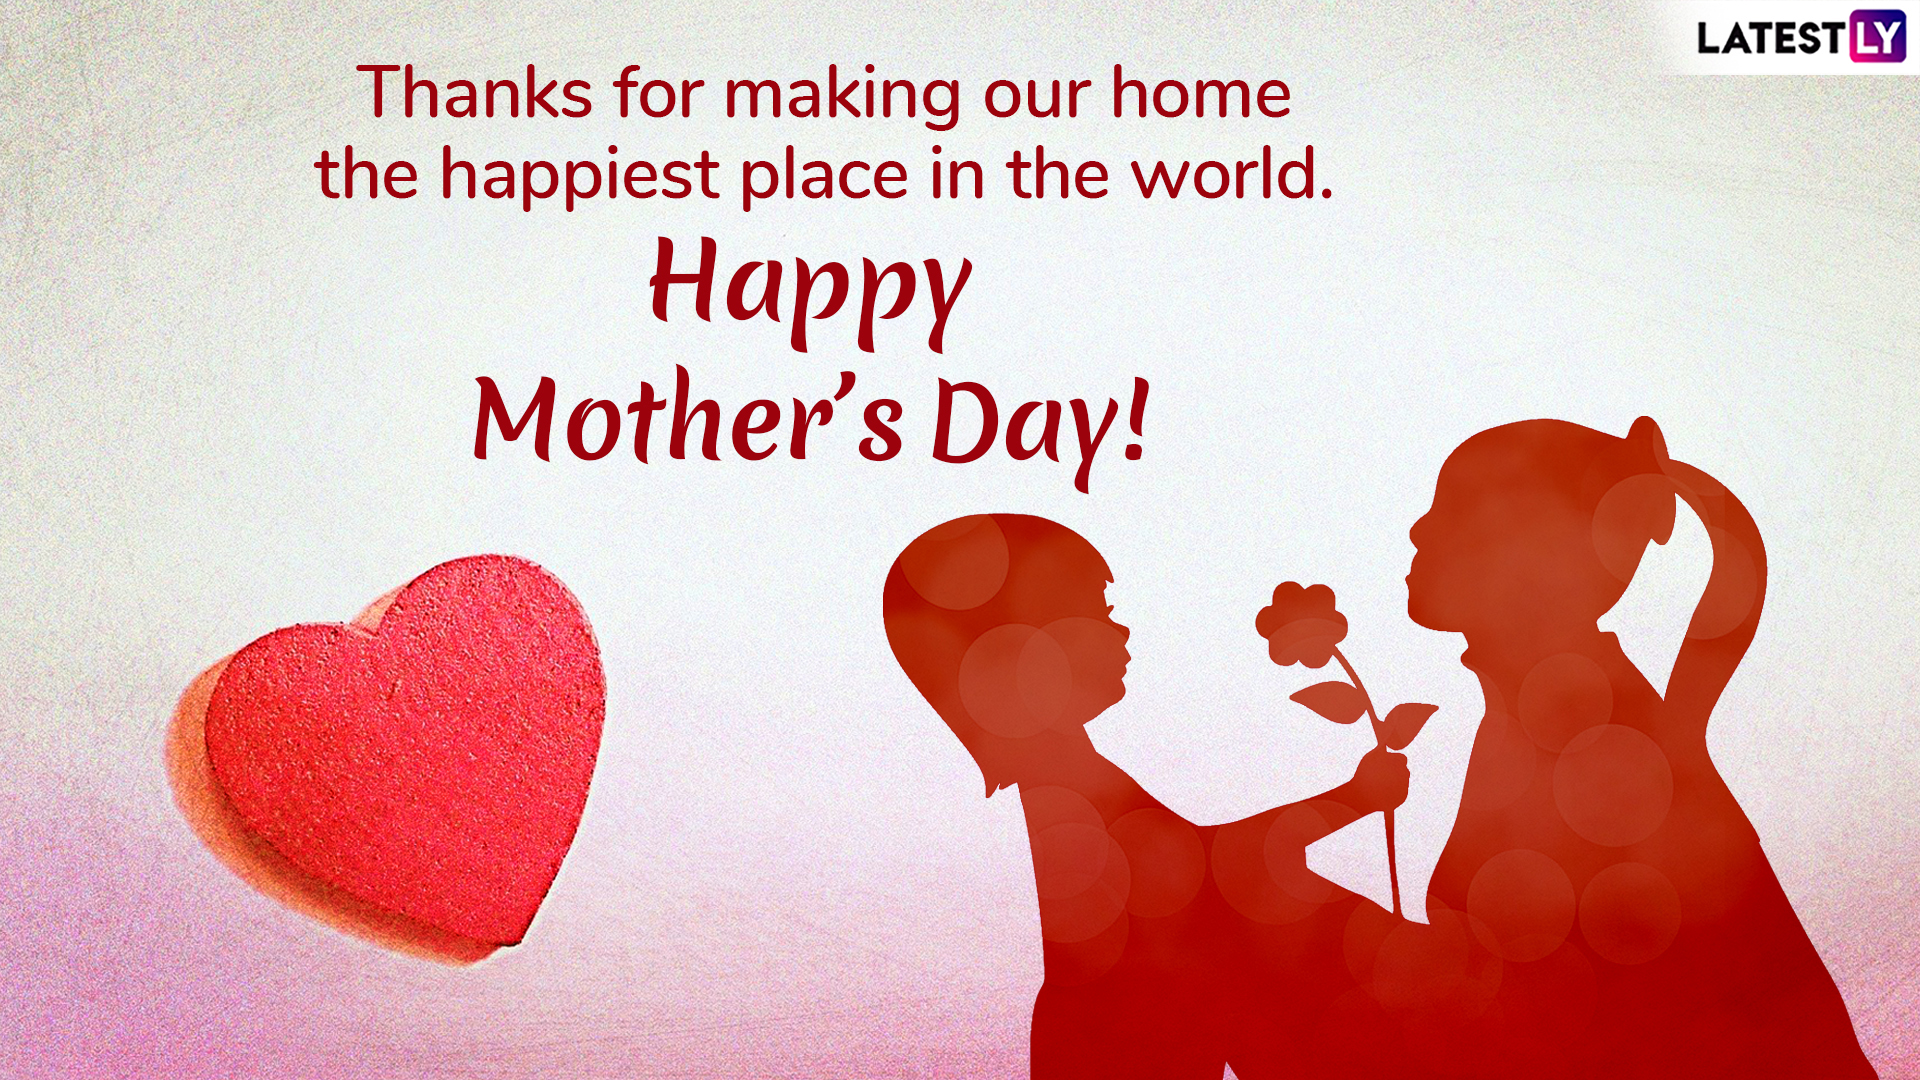 Mother's Day 2019 Wishes: WhatsApp Stickers, GIF Images, SMS, Greetings ...